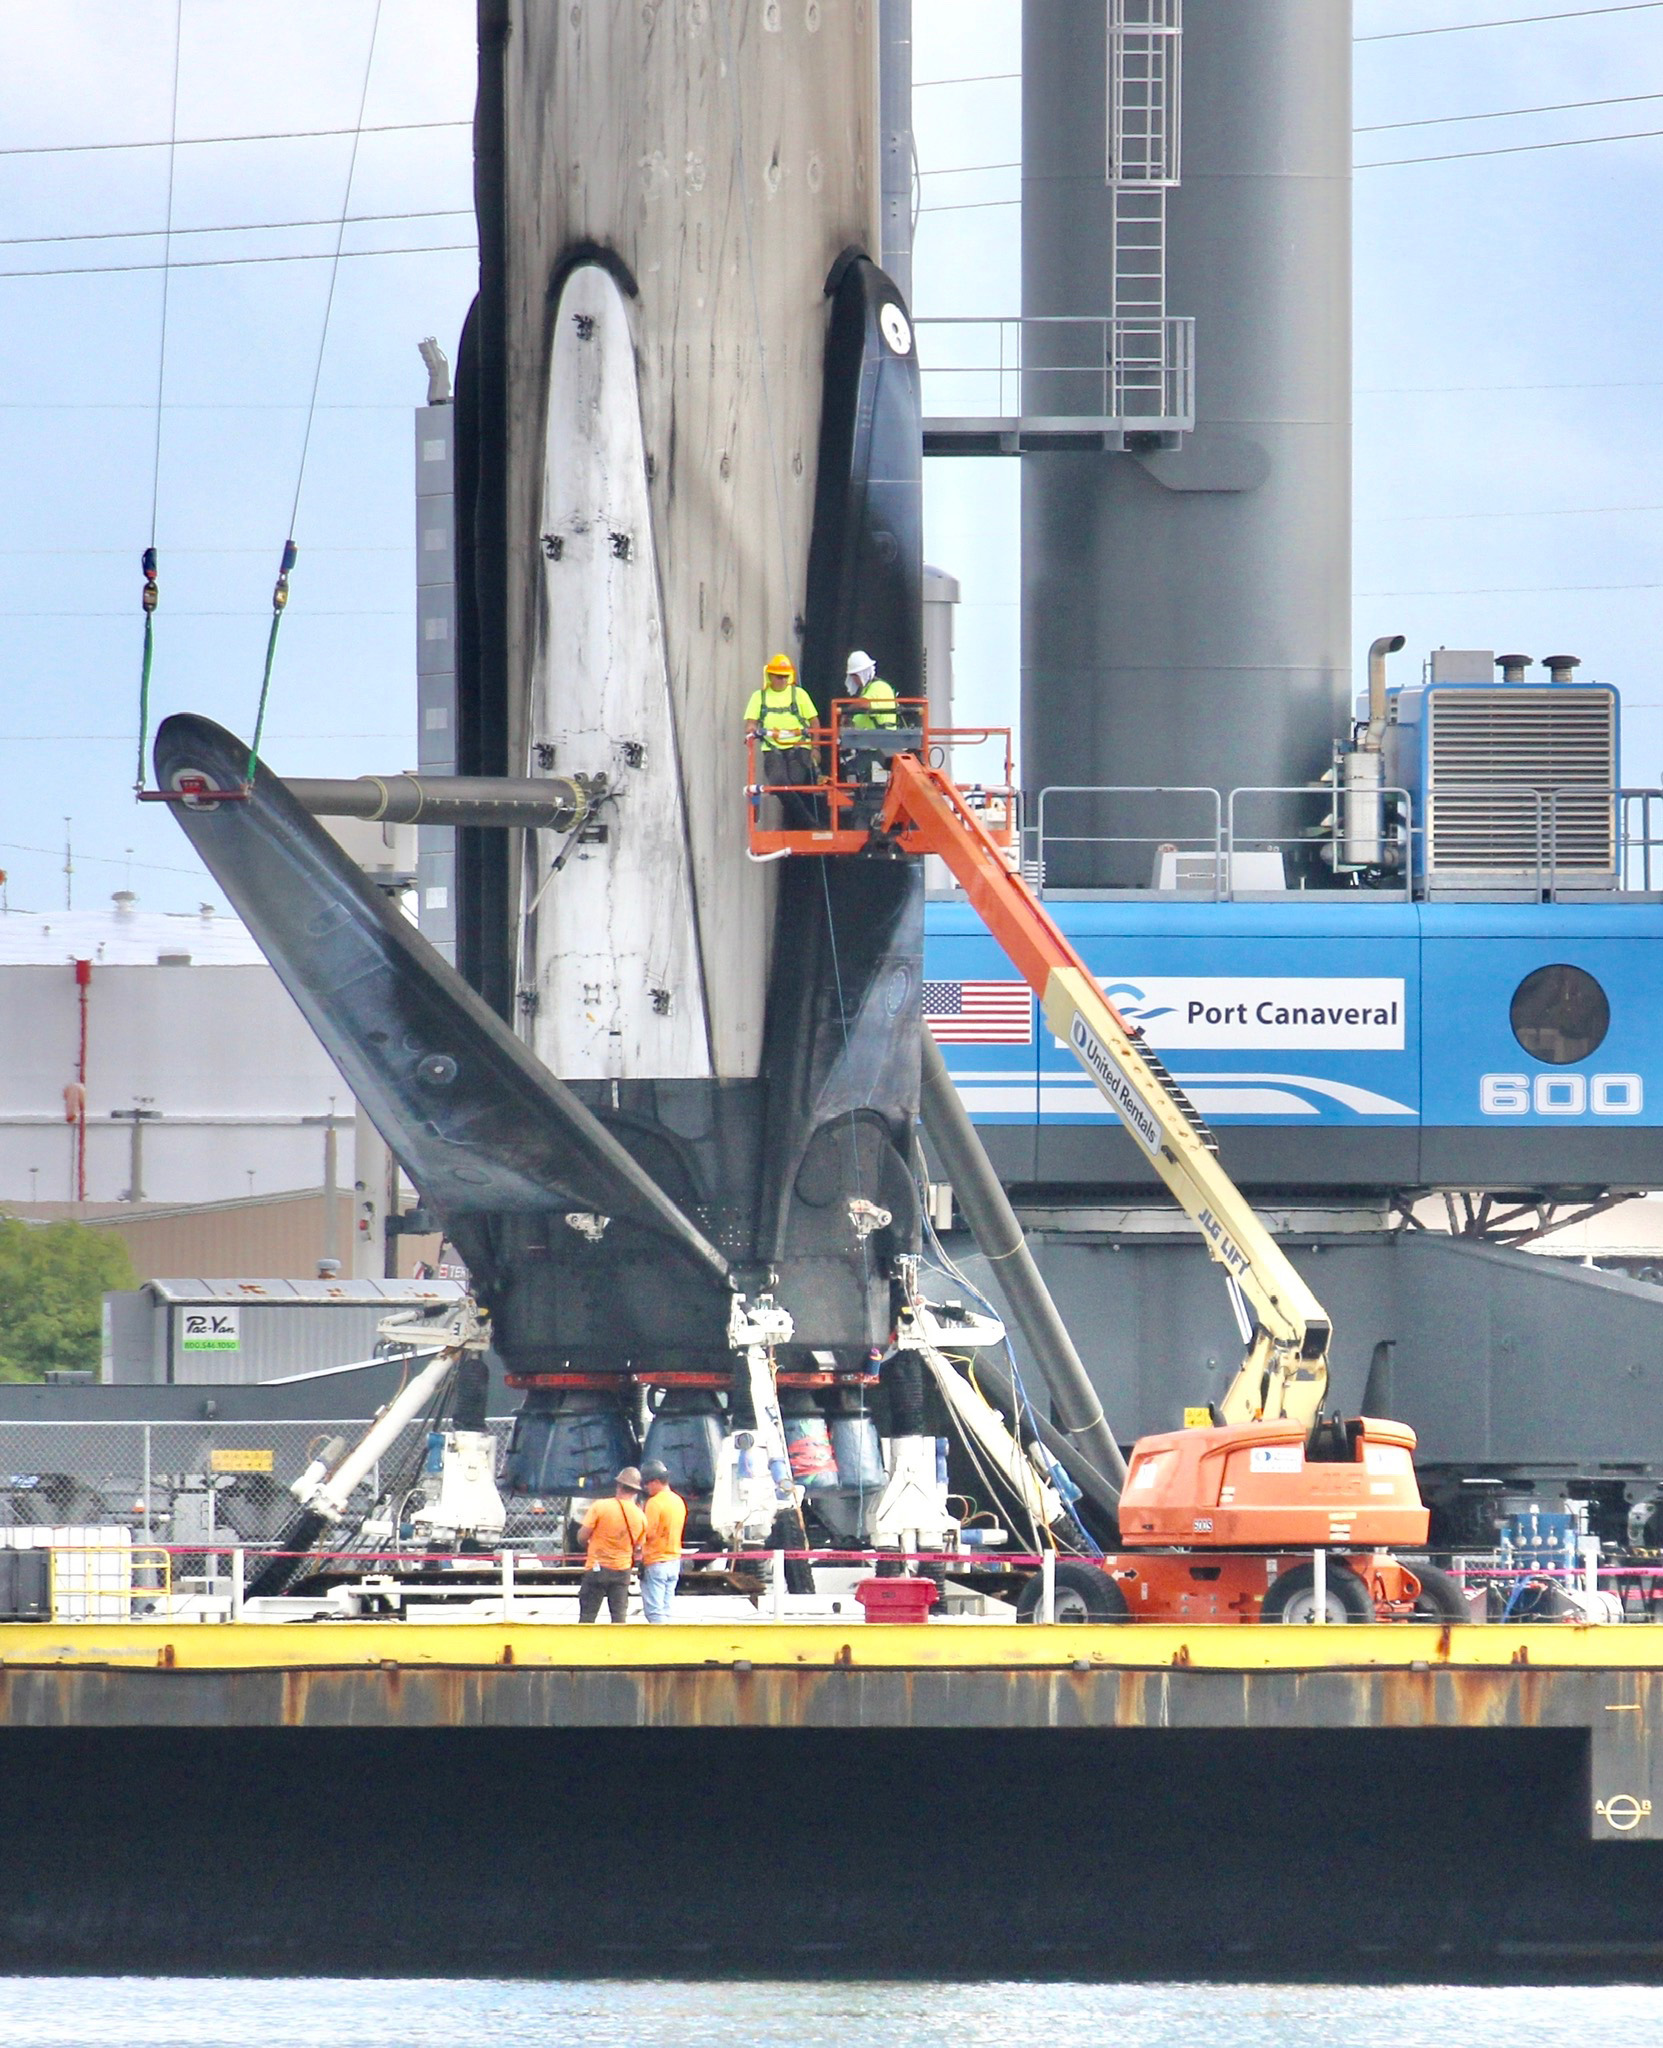 SpaceX Falcon 9 Goes Horizontal After All 4 Landing Legs Retracted: Photos